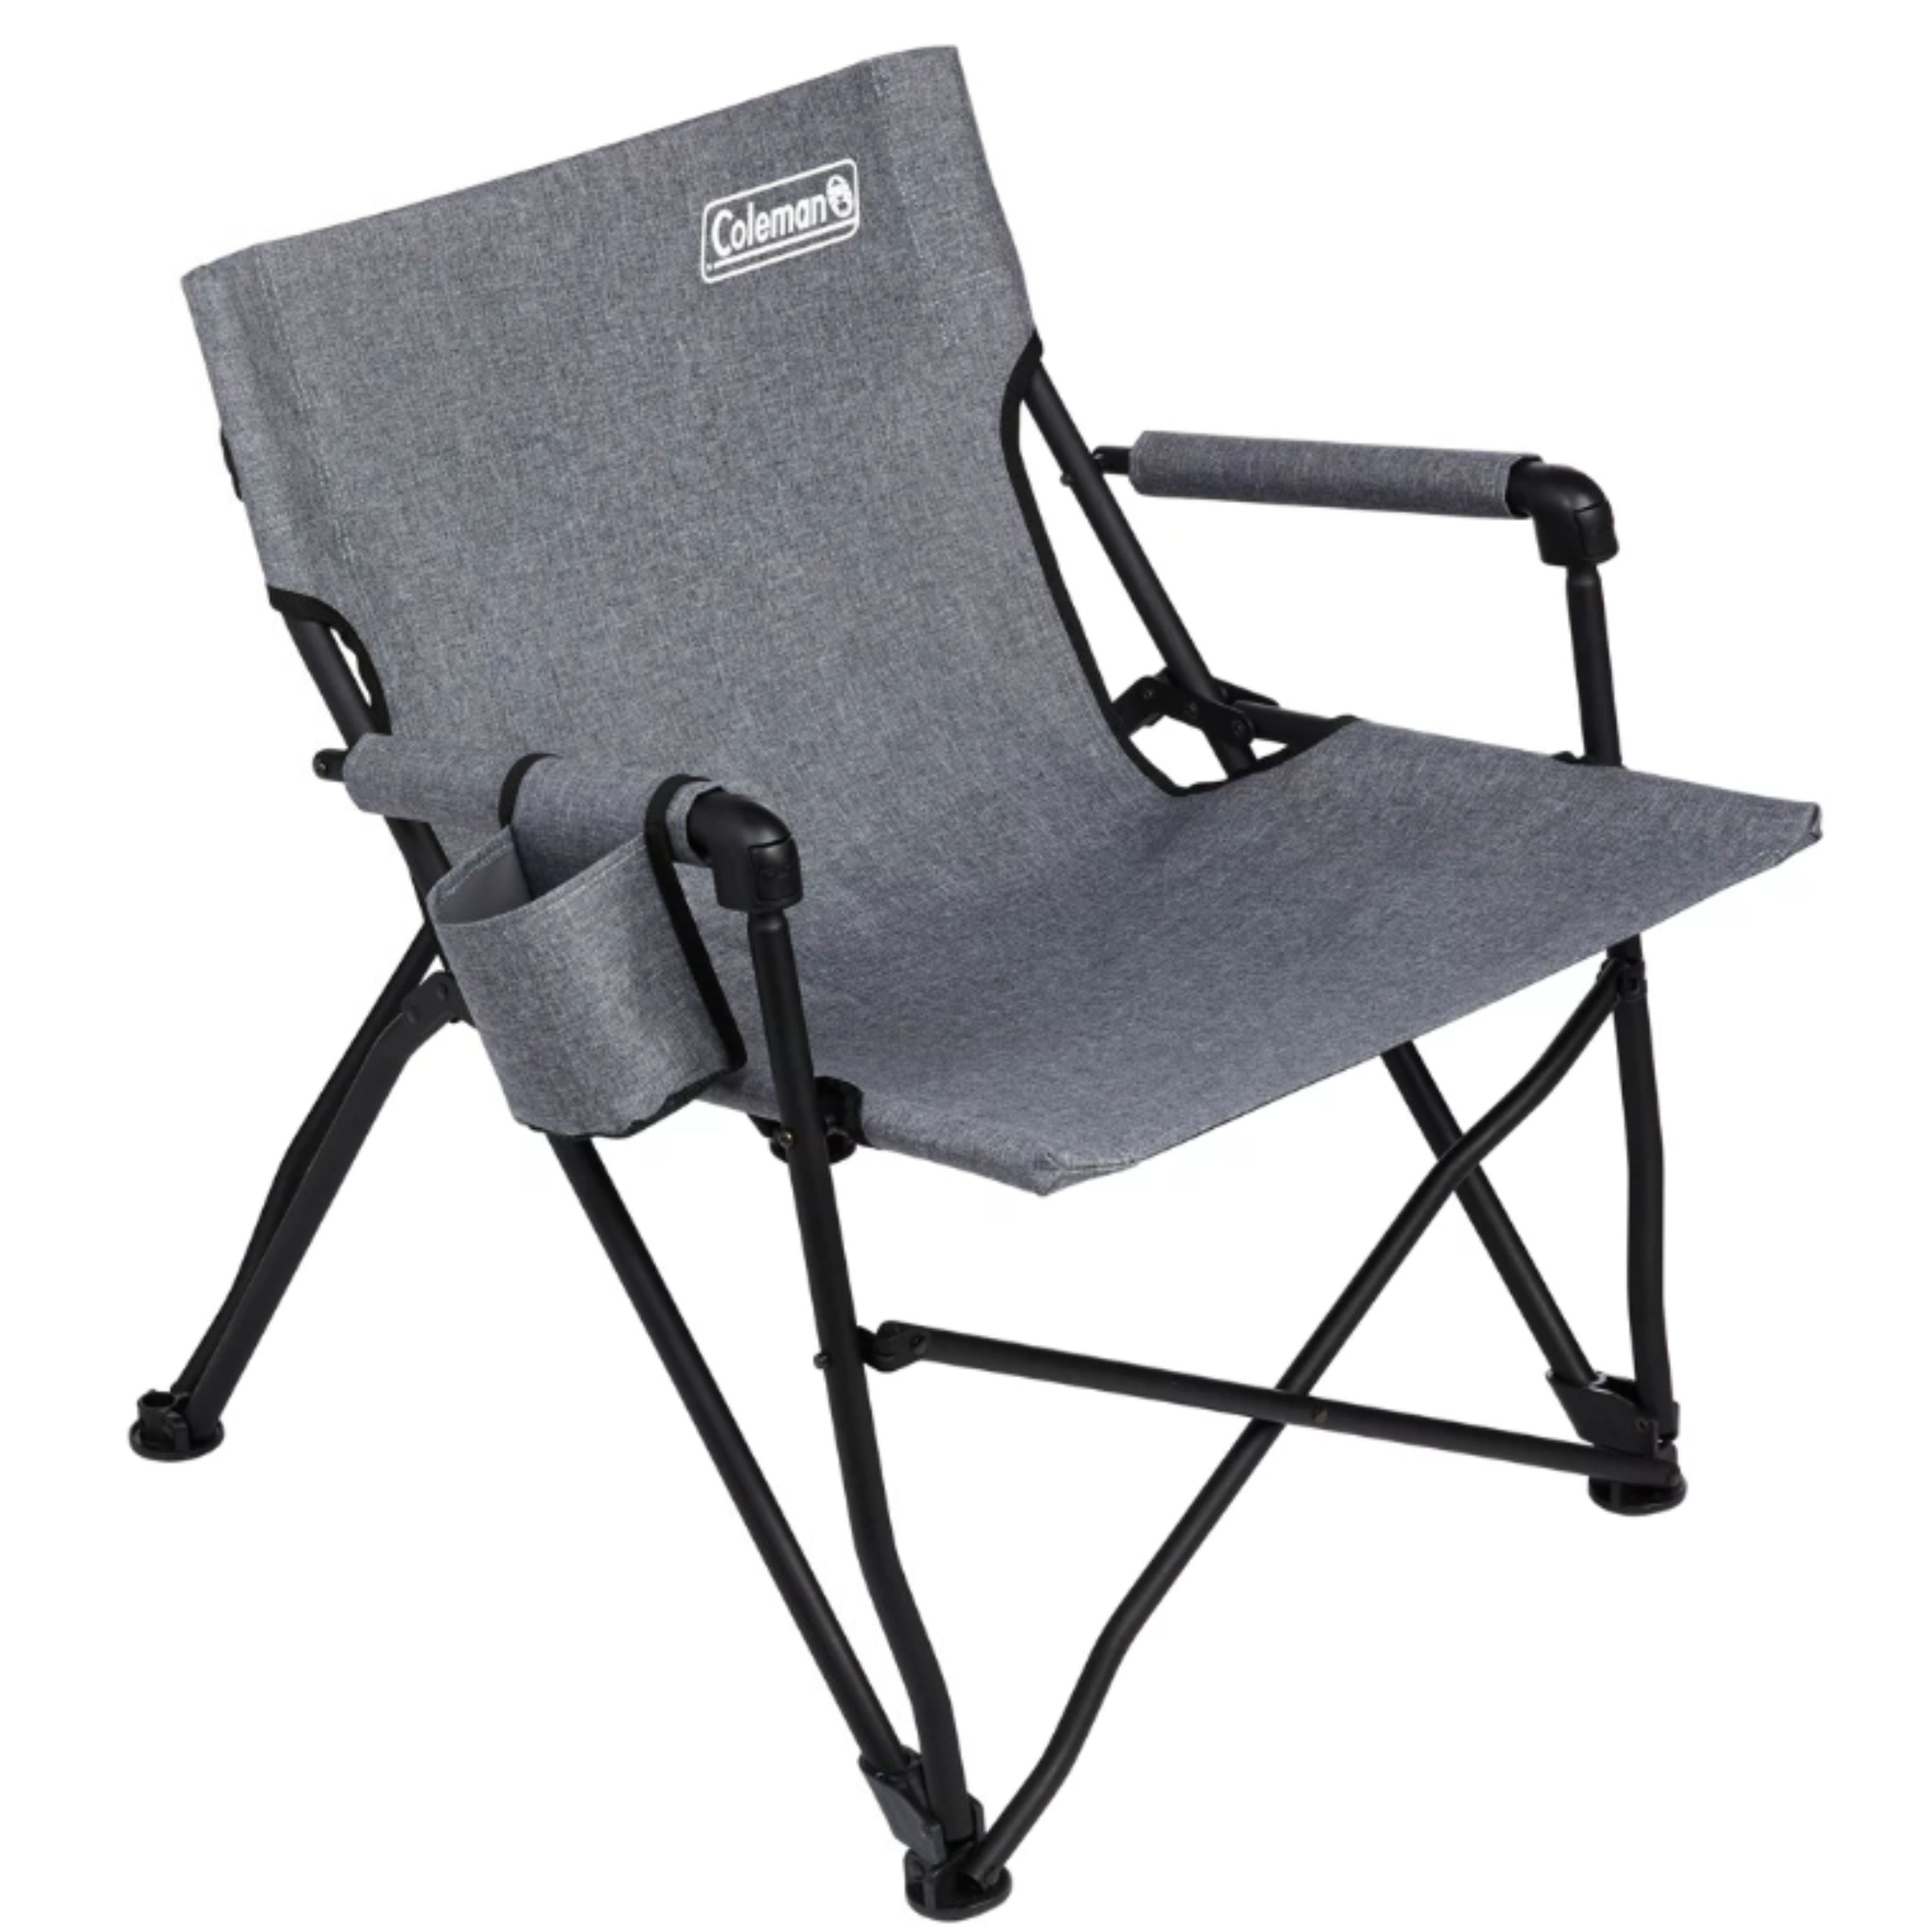 "Forester" Foldable chair